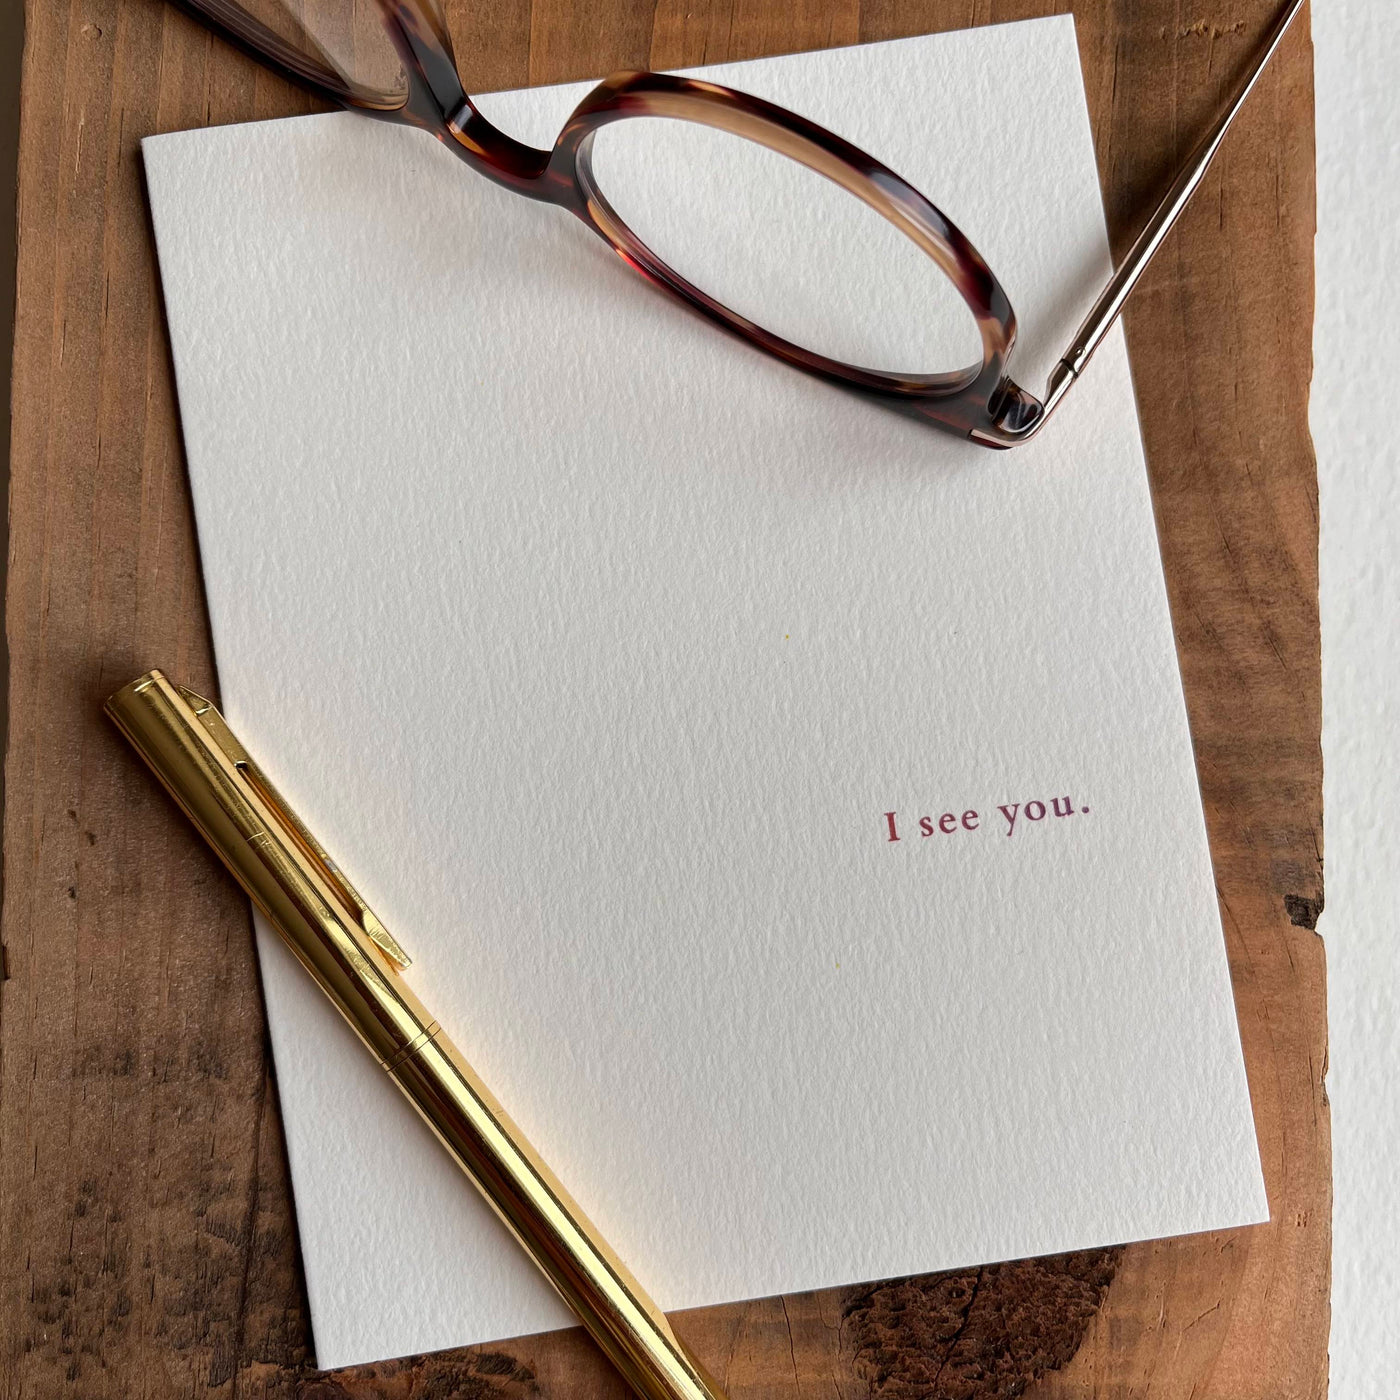 Beknown greeting card w/ eyeglasses and gold pen. I see you.